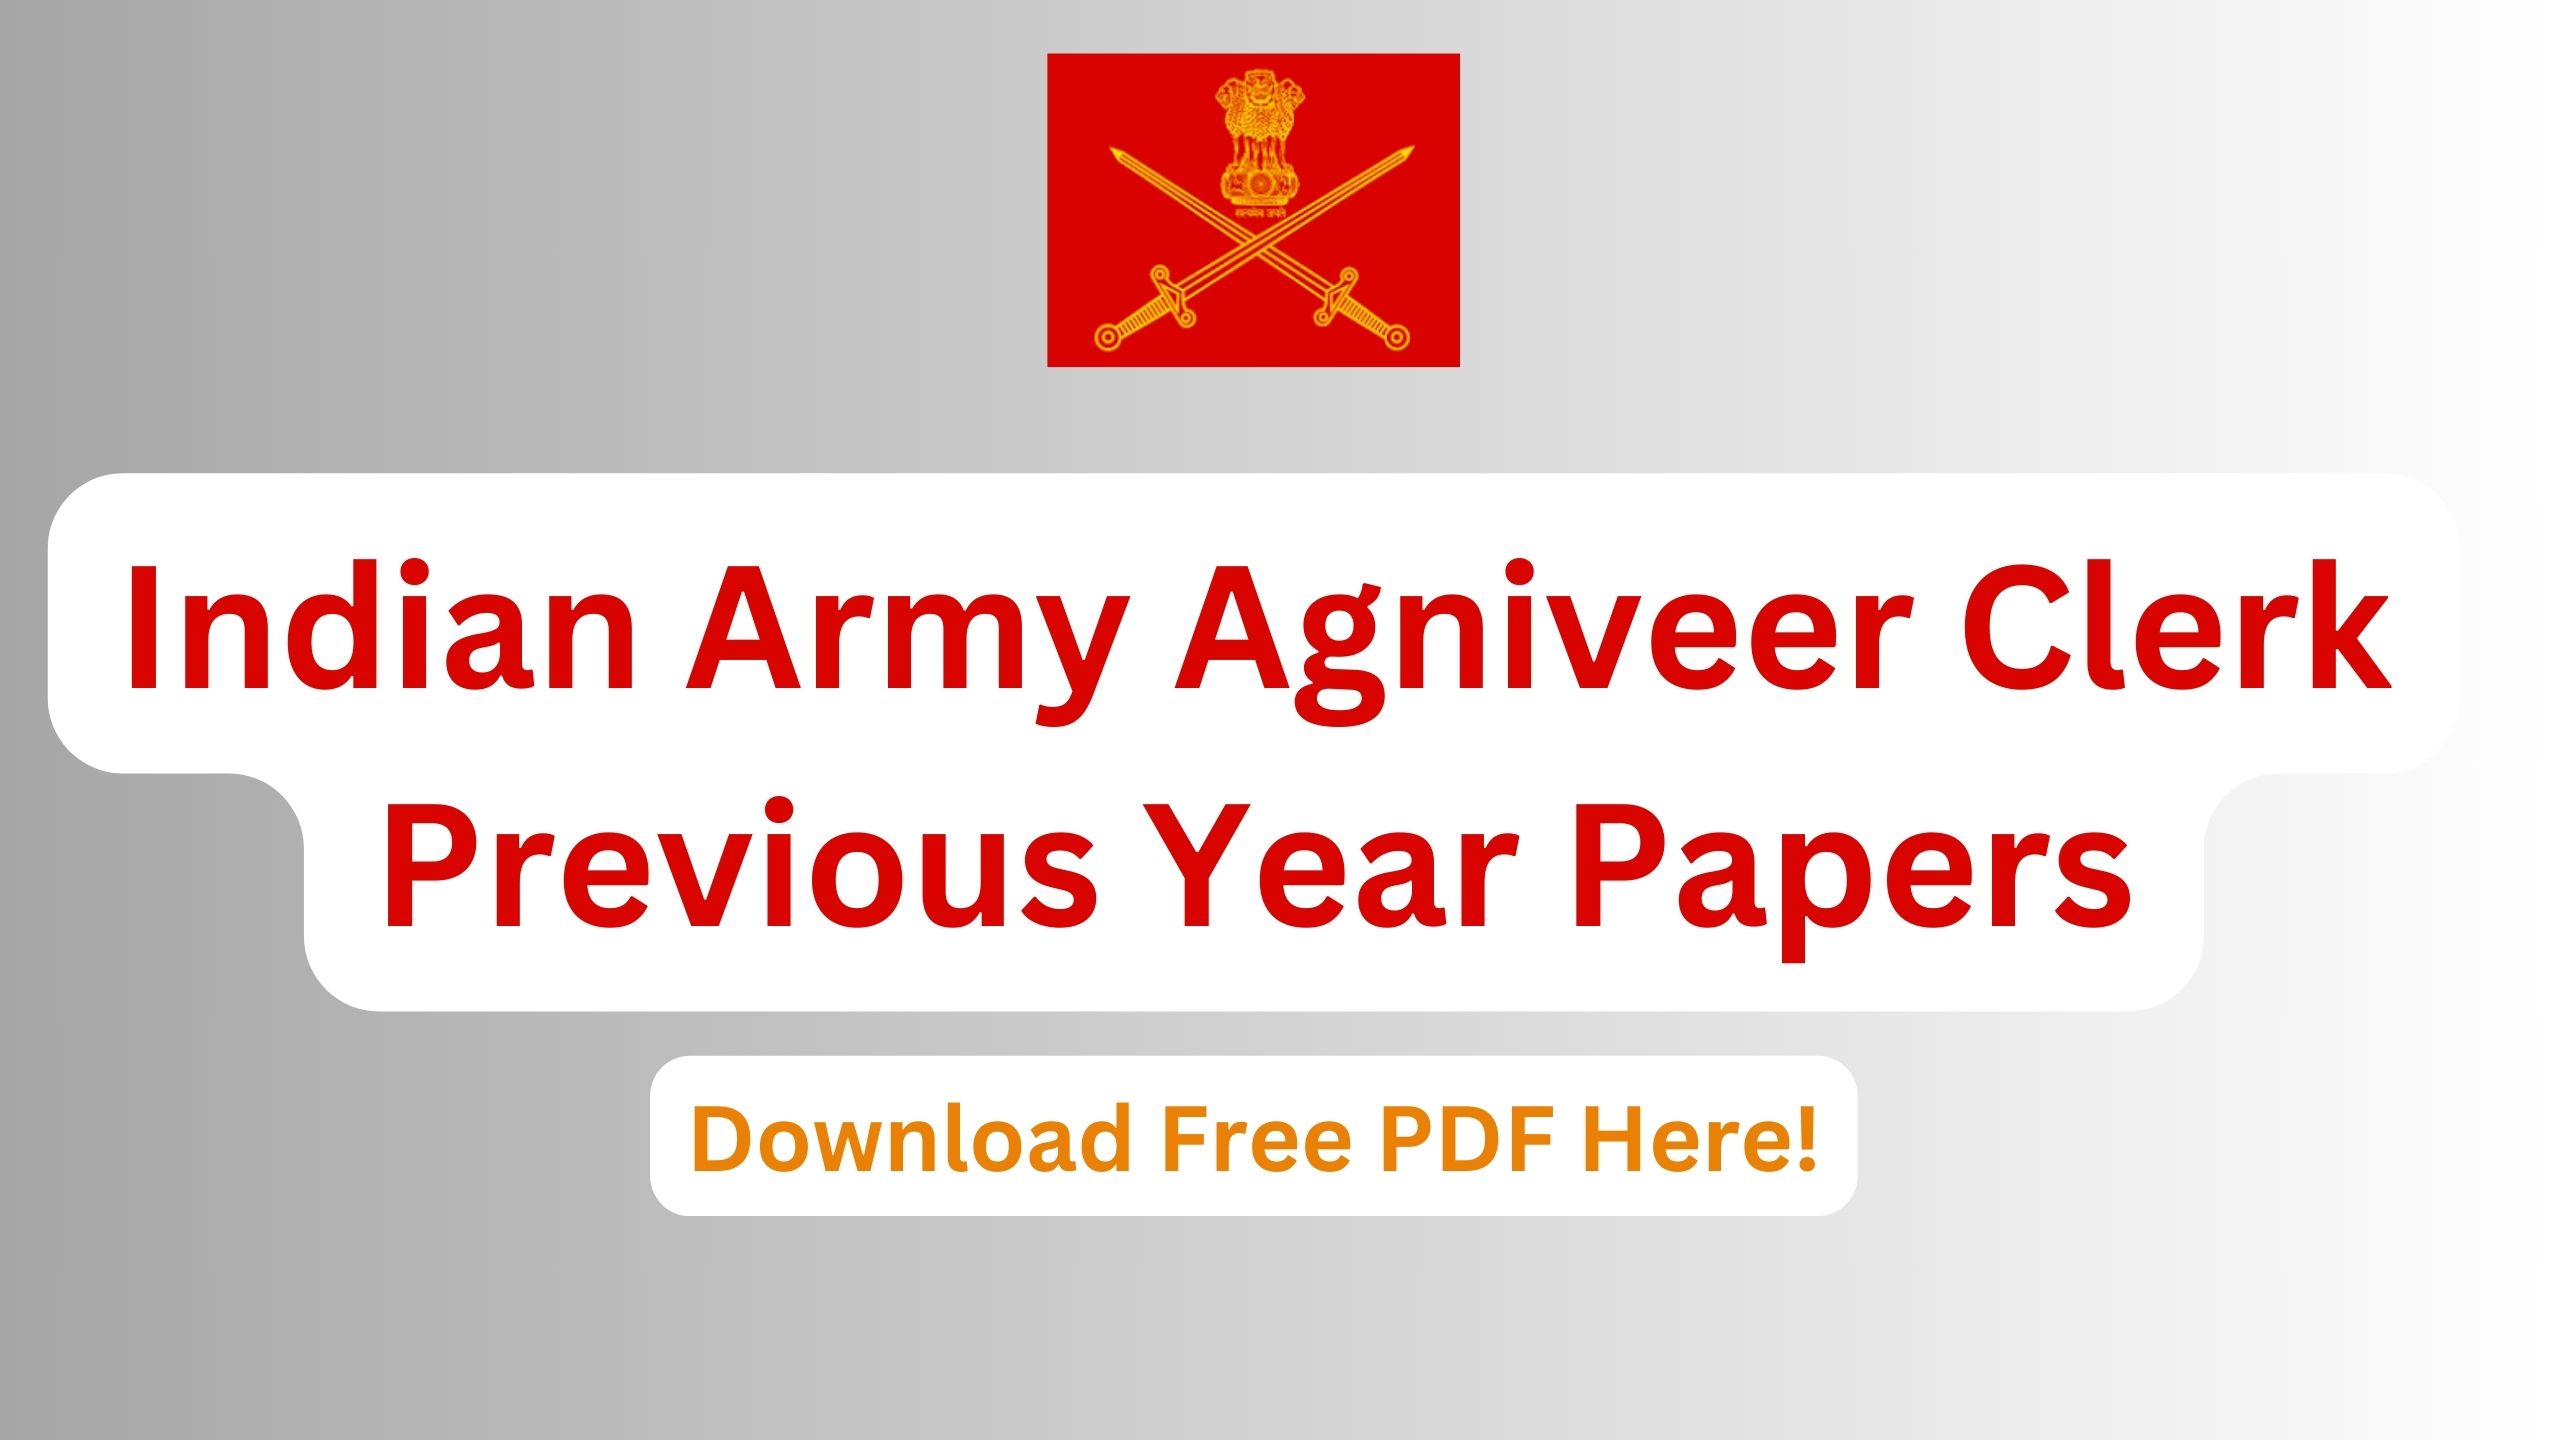 Indian Army Agniveer Clerk Previous Year Papers, Download Old Paper Here!